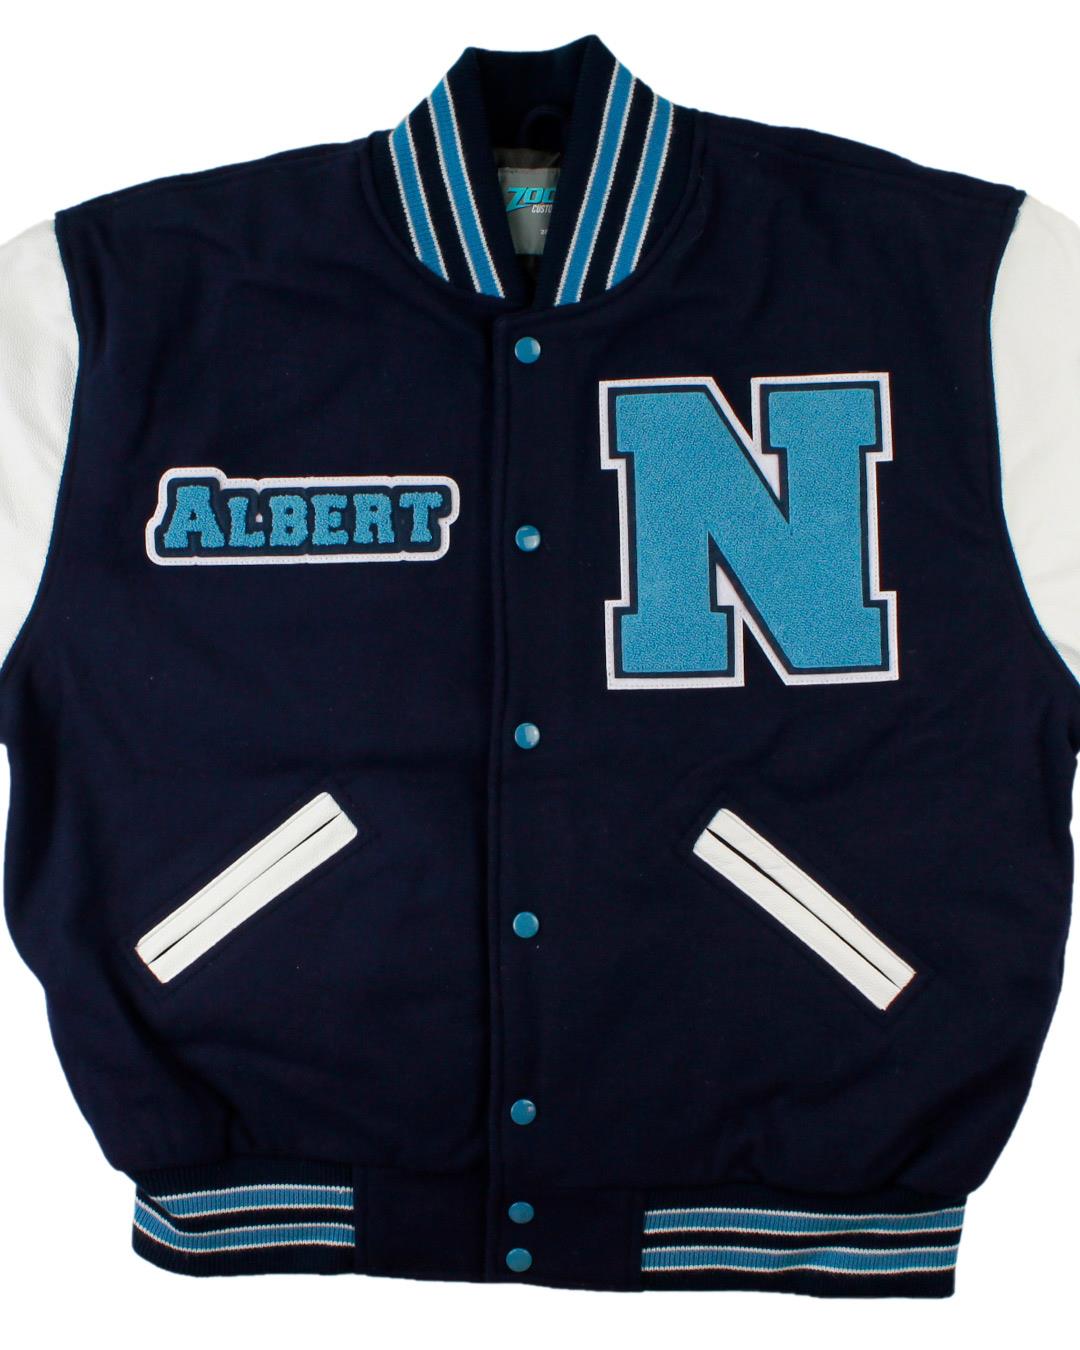 Newsome High School Letter Jacket, Lithia, FL - Front